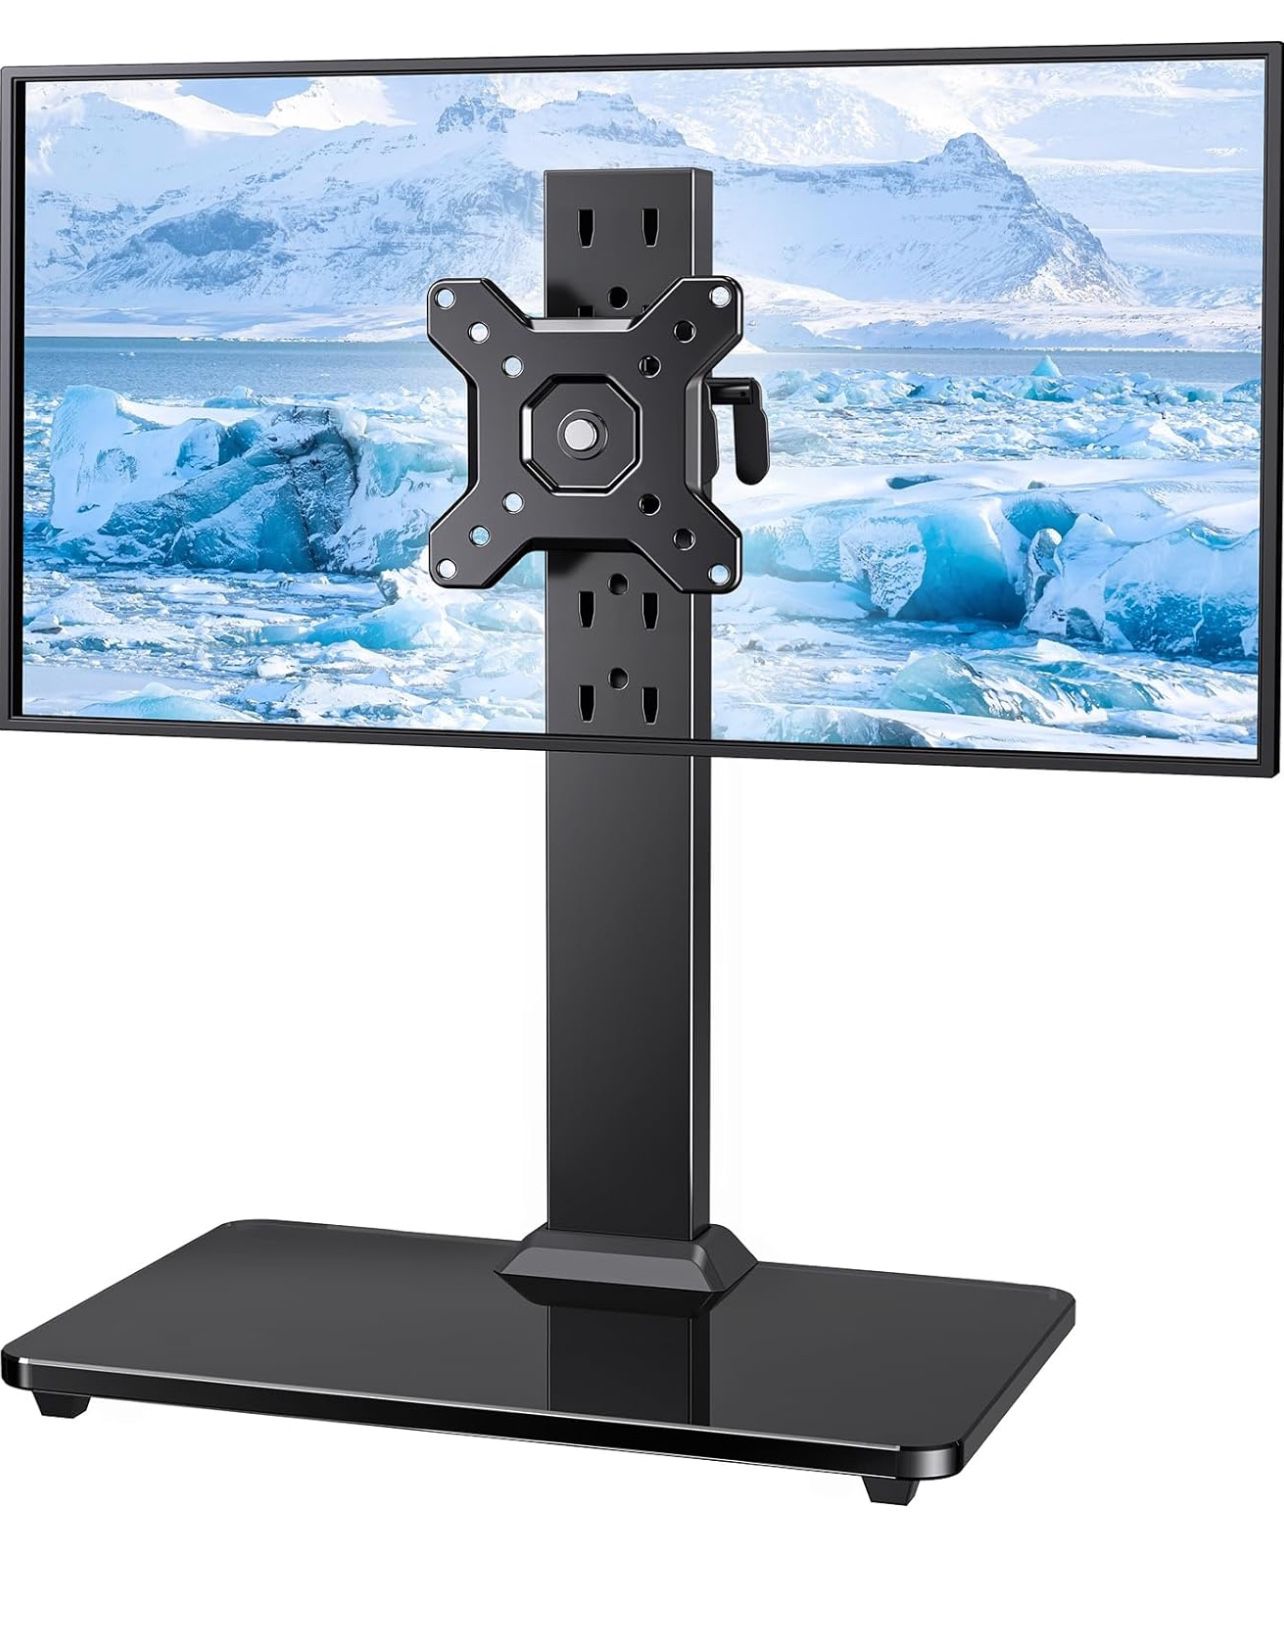 Brandnew Single Monitor Stand for 13-34 inch Screens up to 44 lbs, Free-Standing Monitor Riser with 5 Height Settings, Tabletop Monitor Stand with Tem